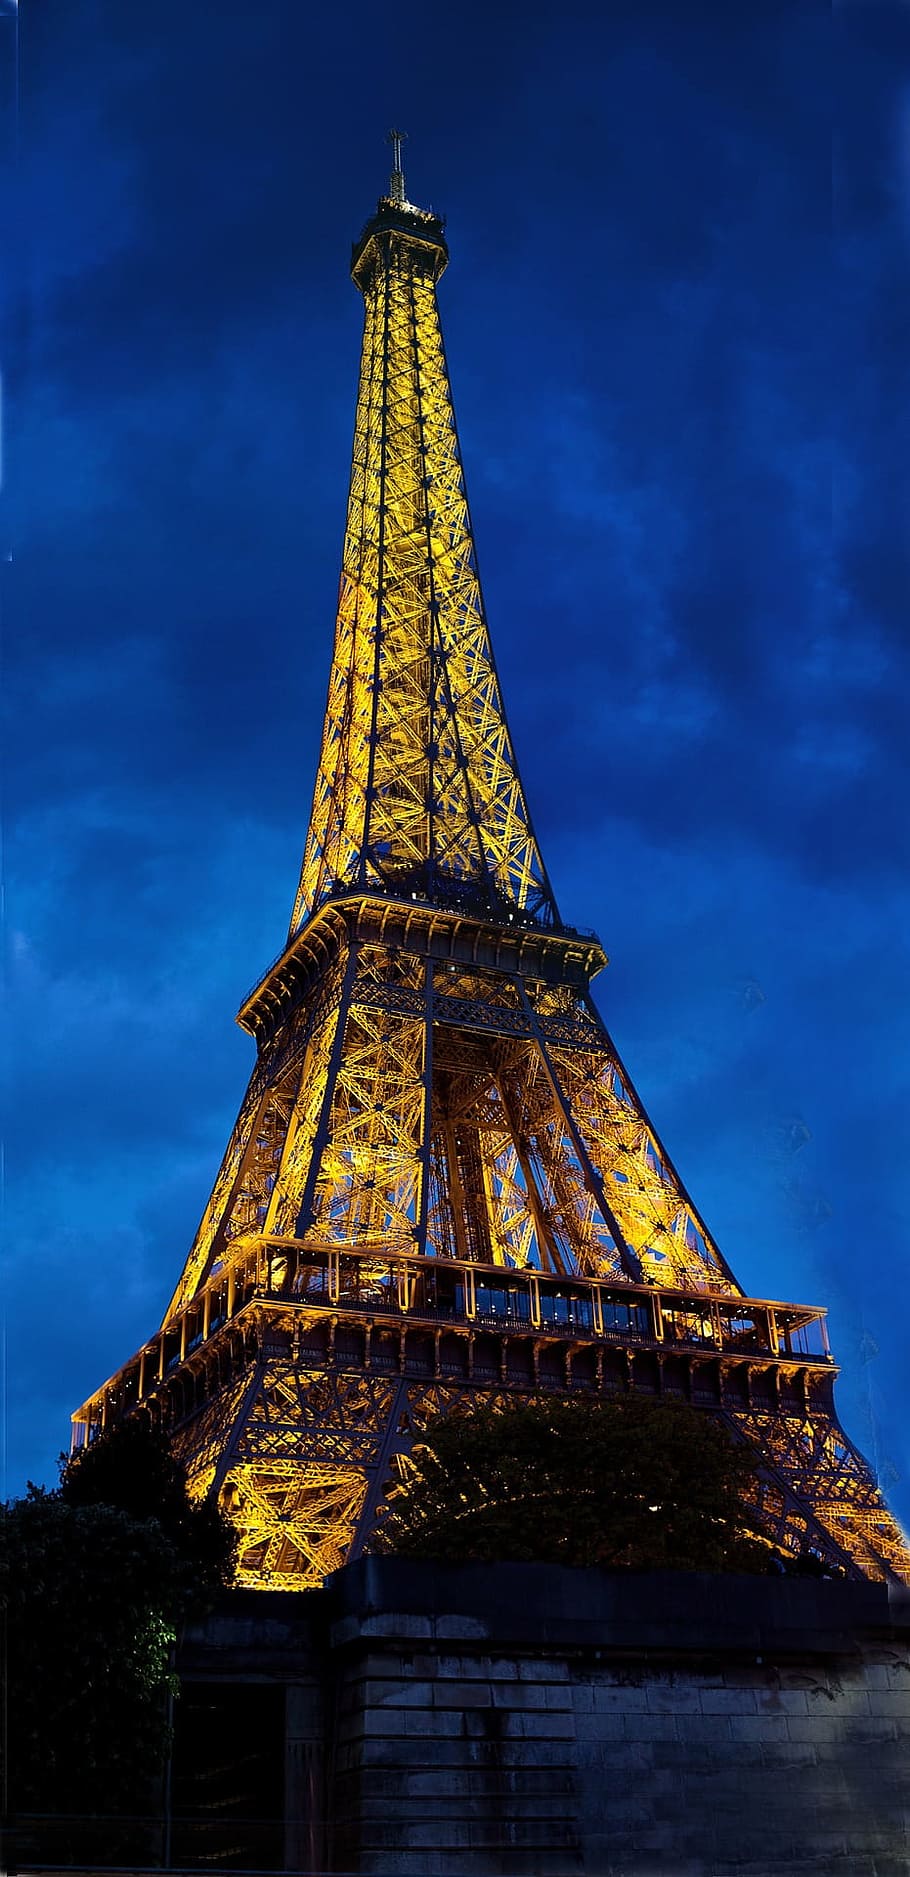 tower, eiffel, construction, architecture, metal, high, height, skyscraper, built structure, tall - high